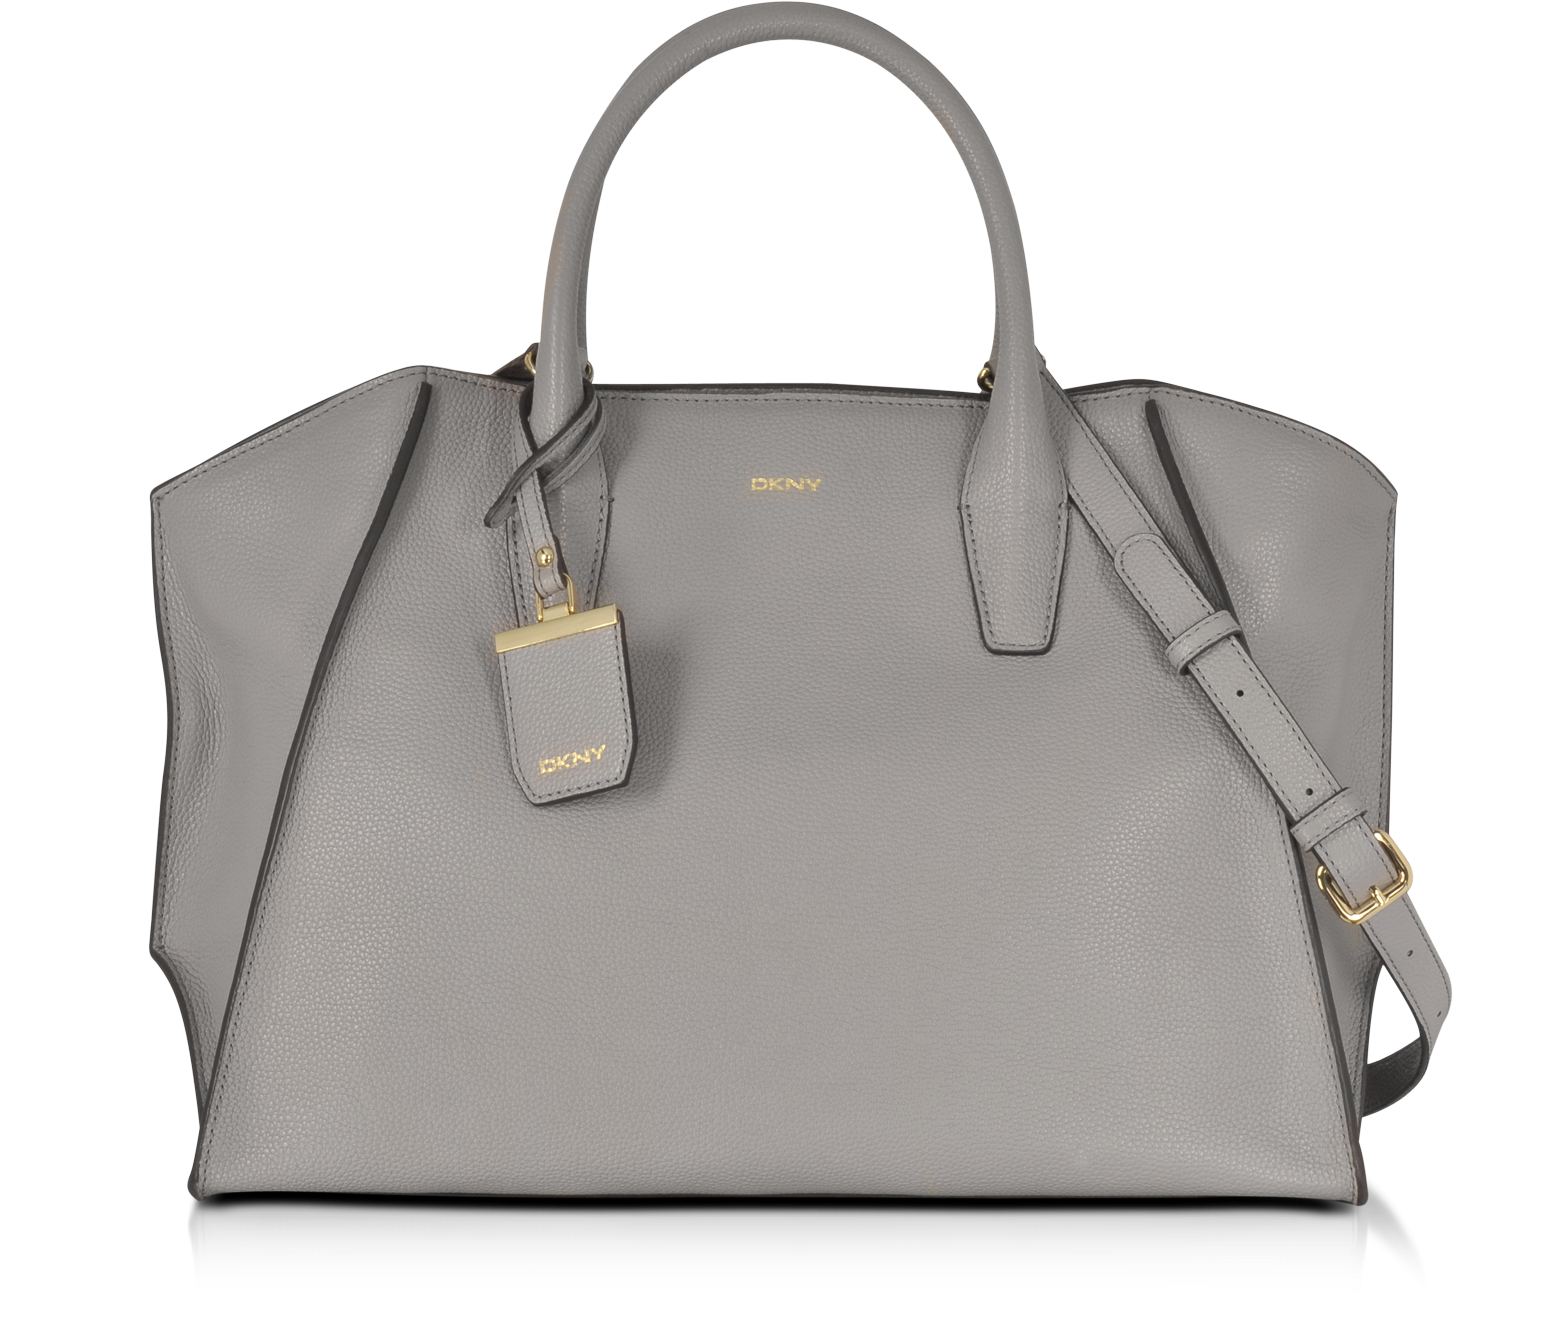 DKNY Large Chelsea Grey Grained Leather Satchel at FORZIERI